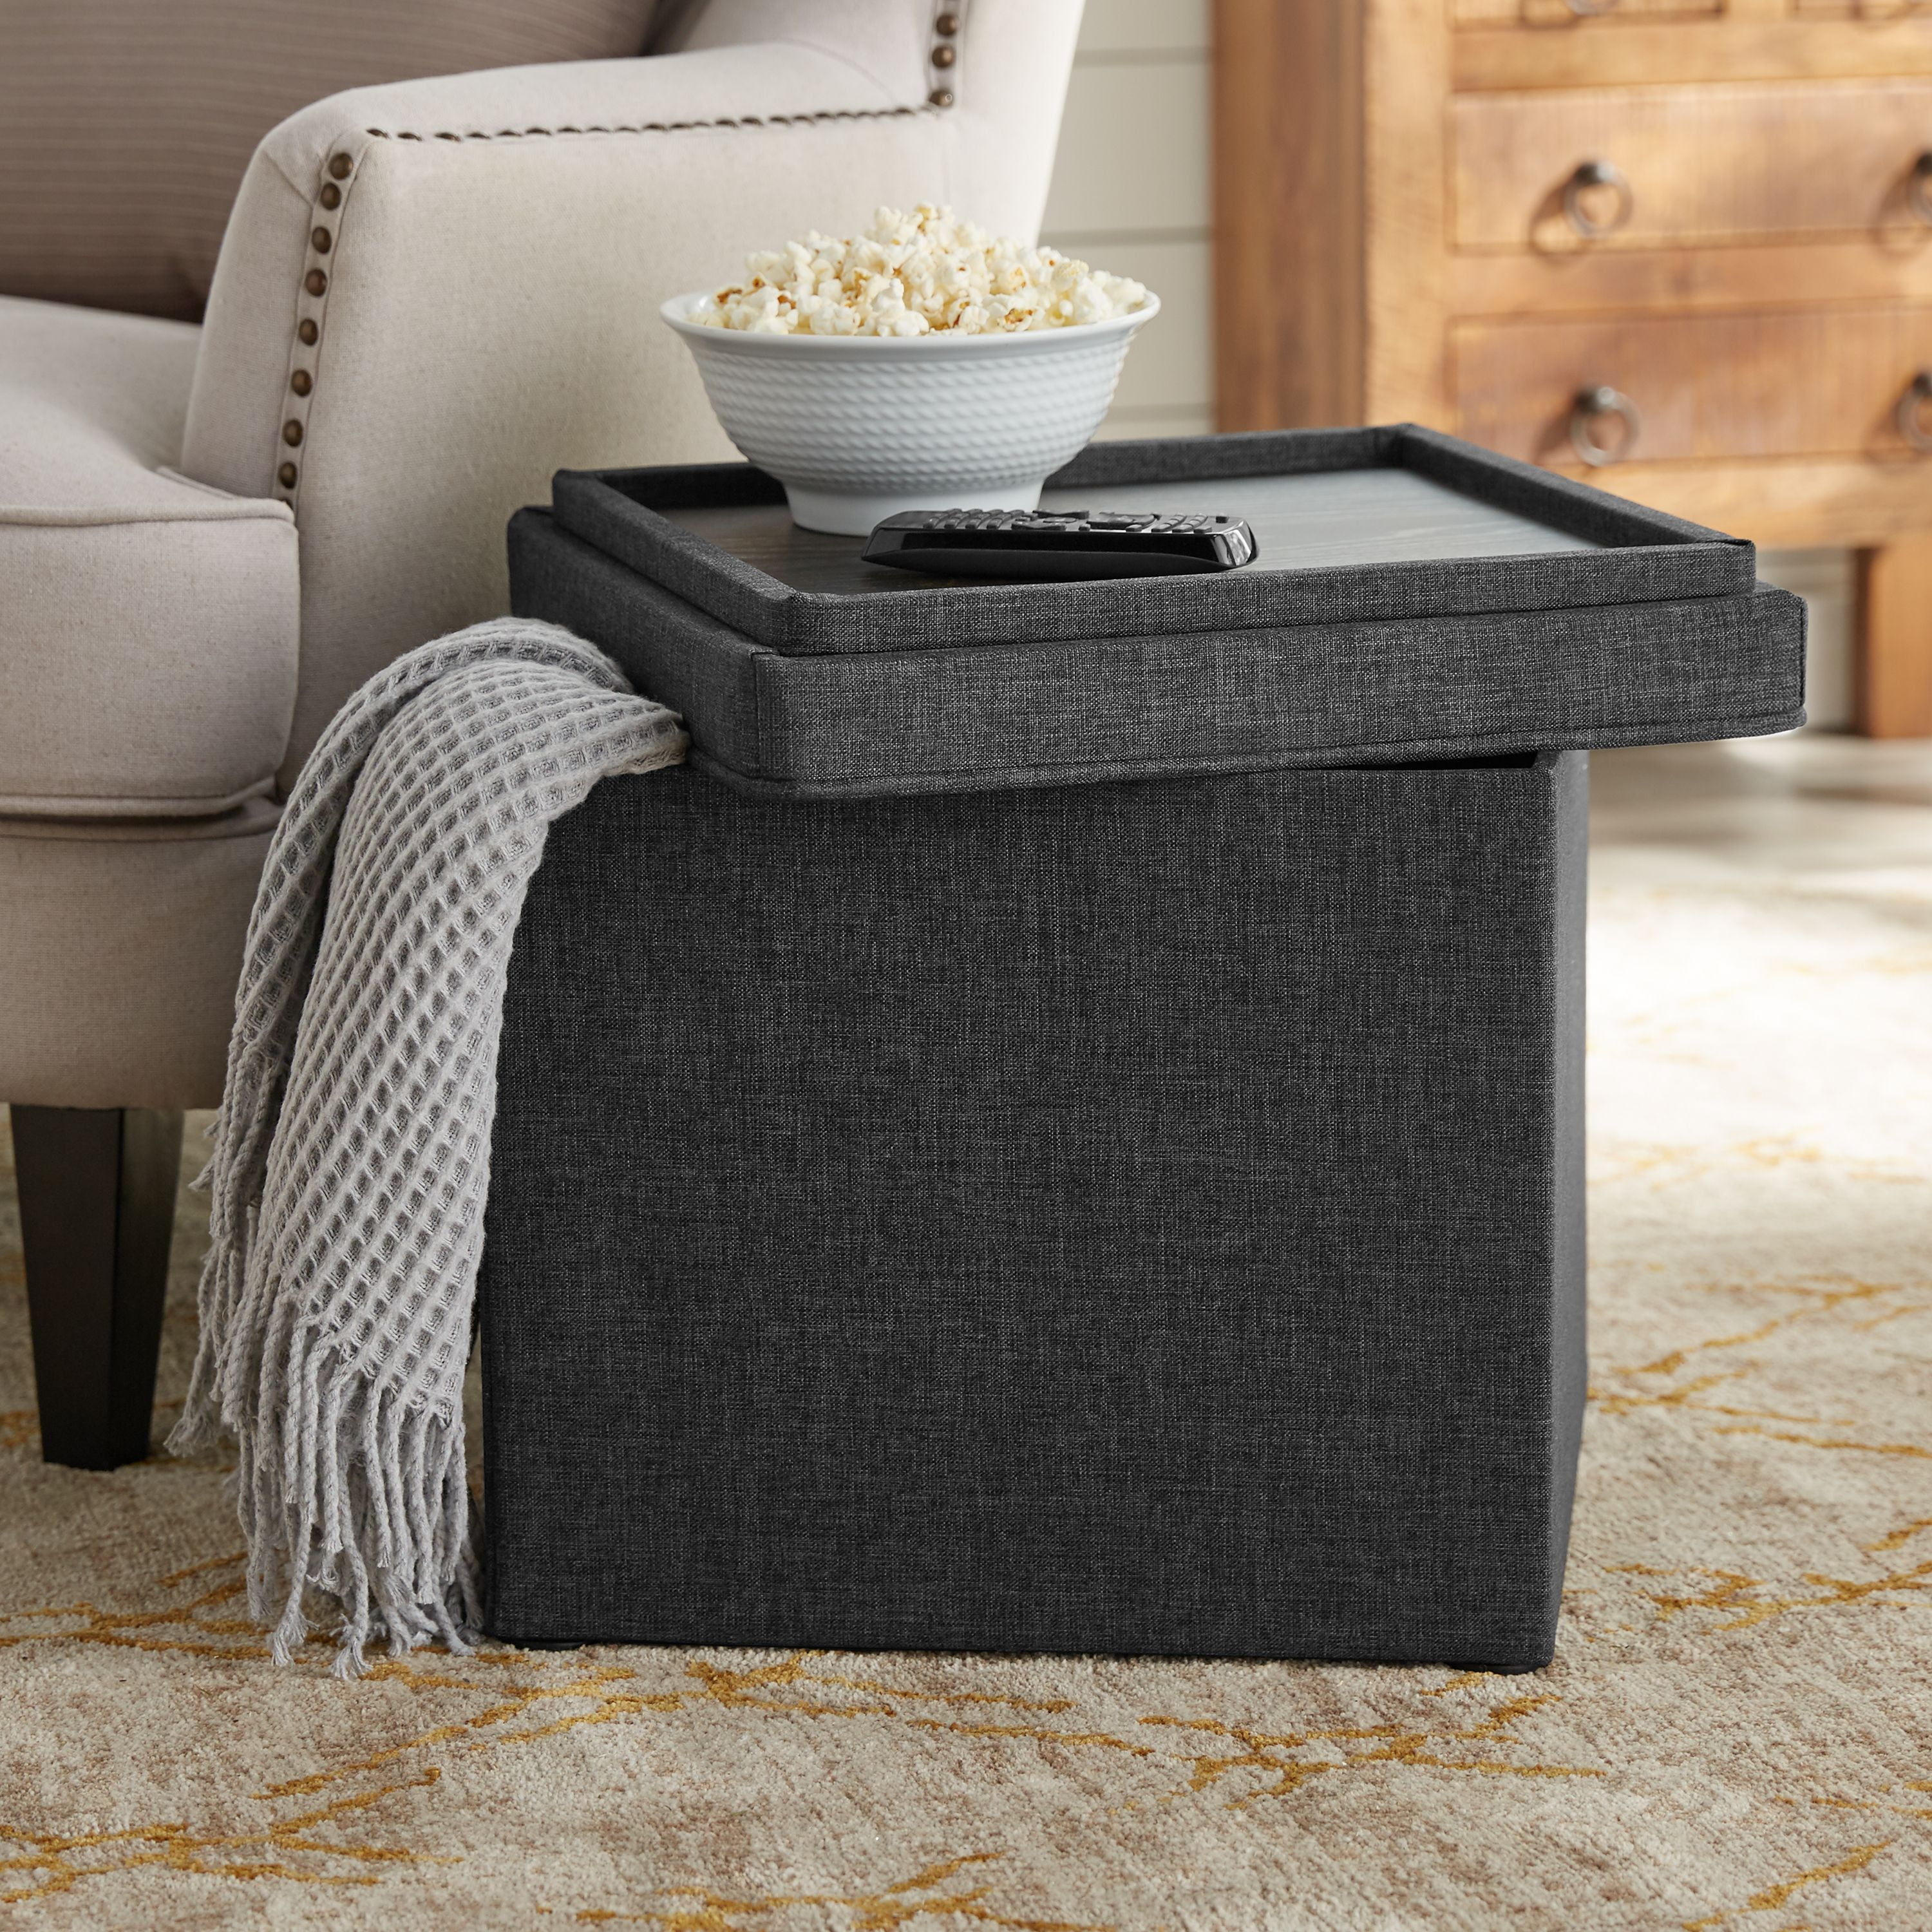 Better Homes & Gardens Storage Ottoman with Tray, 16", Grey